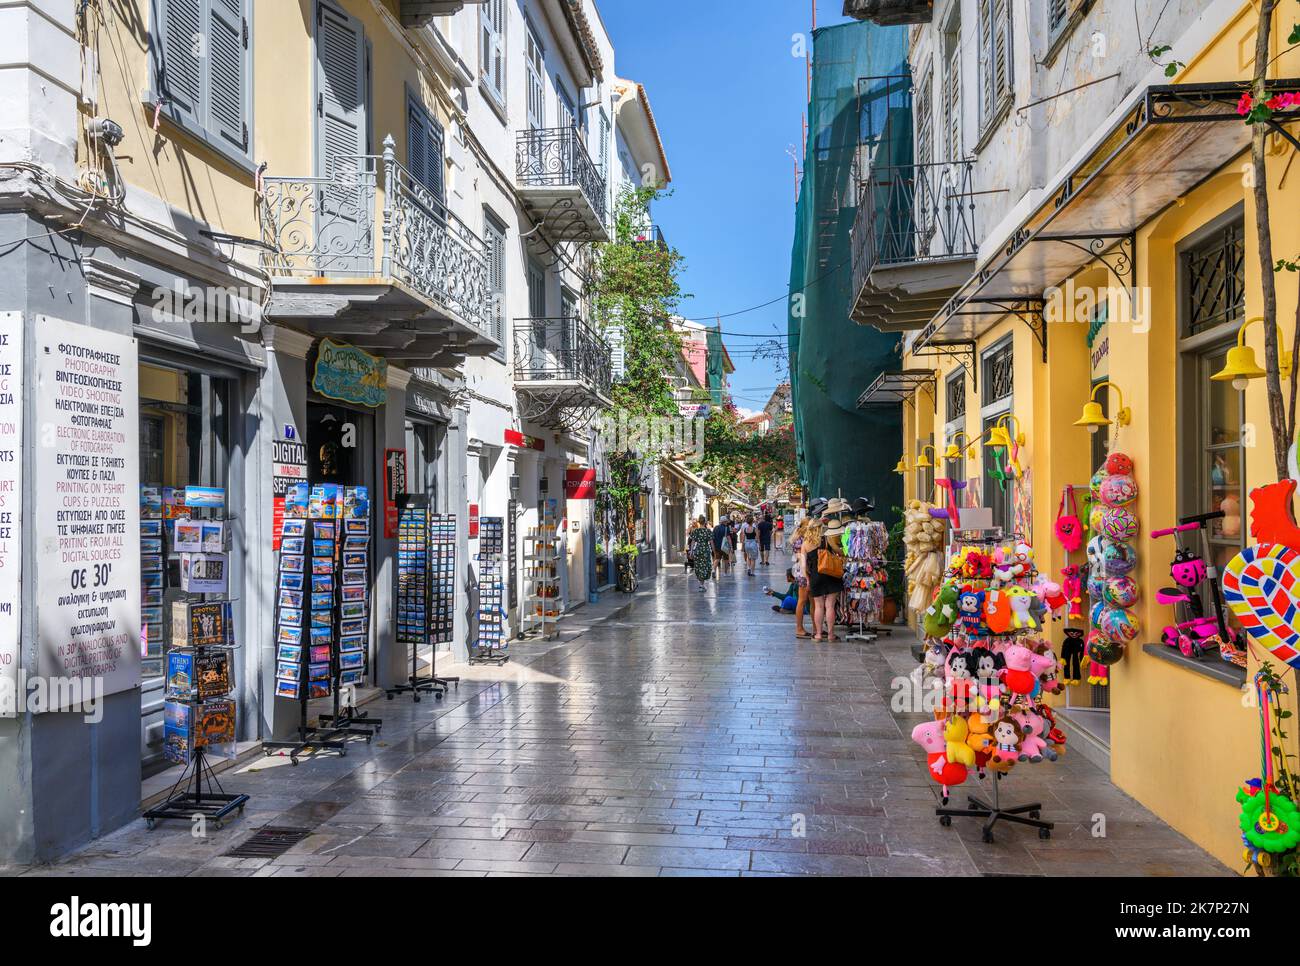 Shops on a street in the old town centre, Nafplio (Nafplion), Peloponnese, Greece Stock Photo